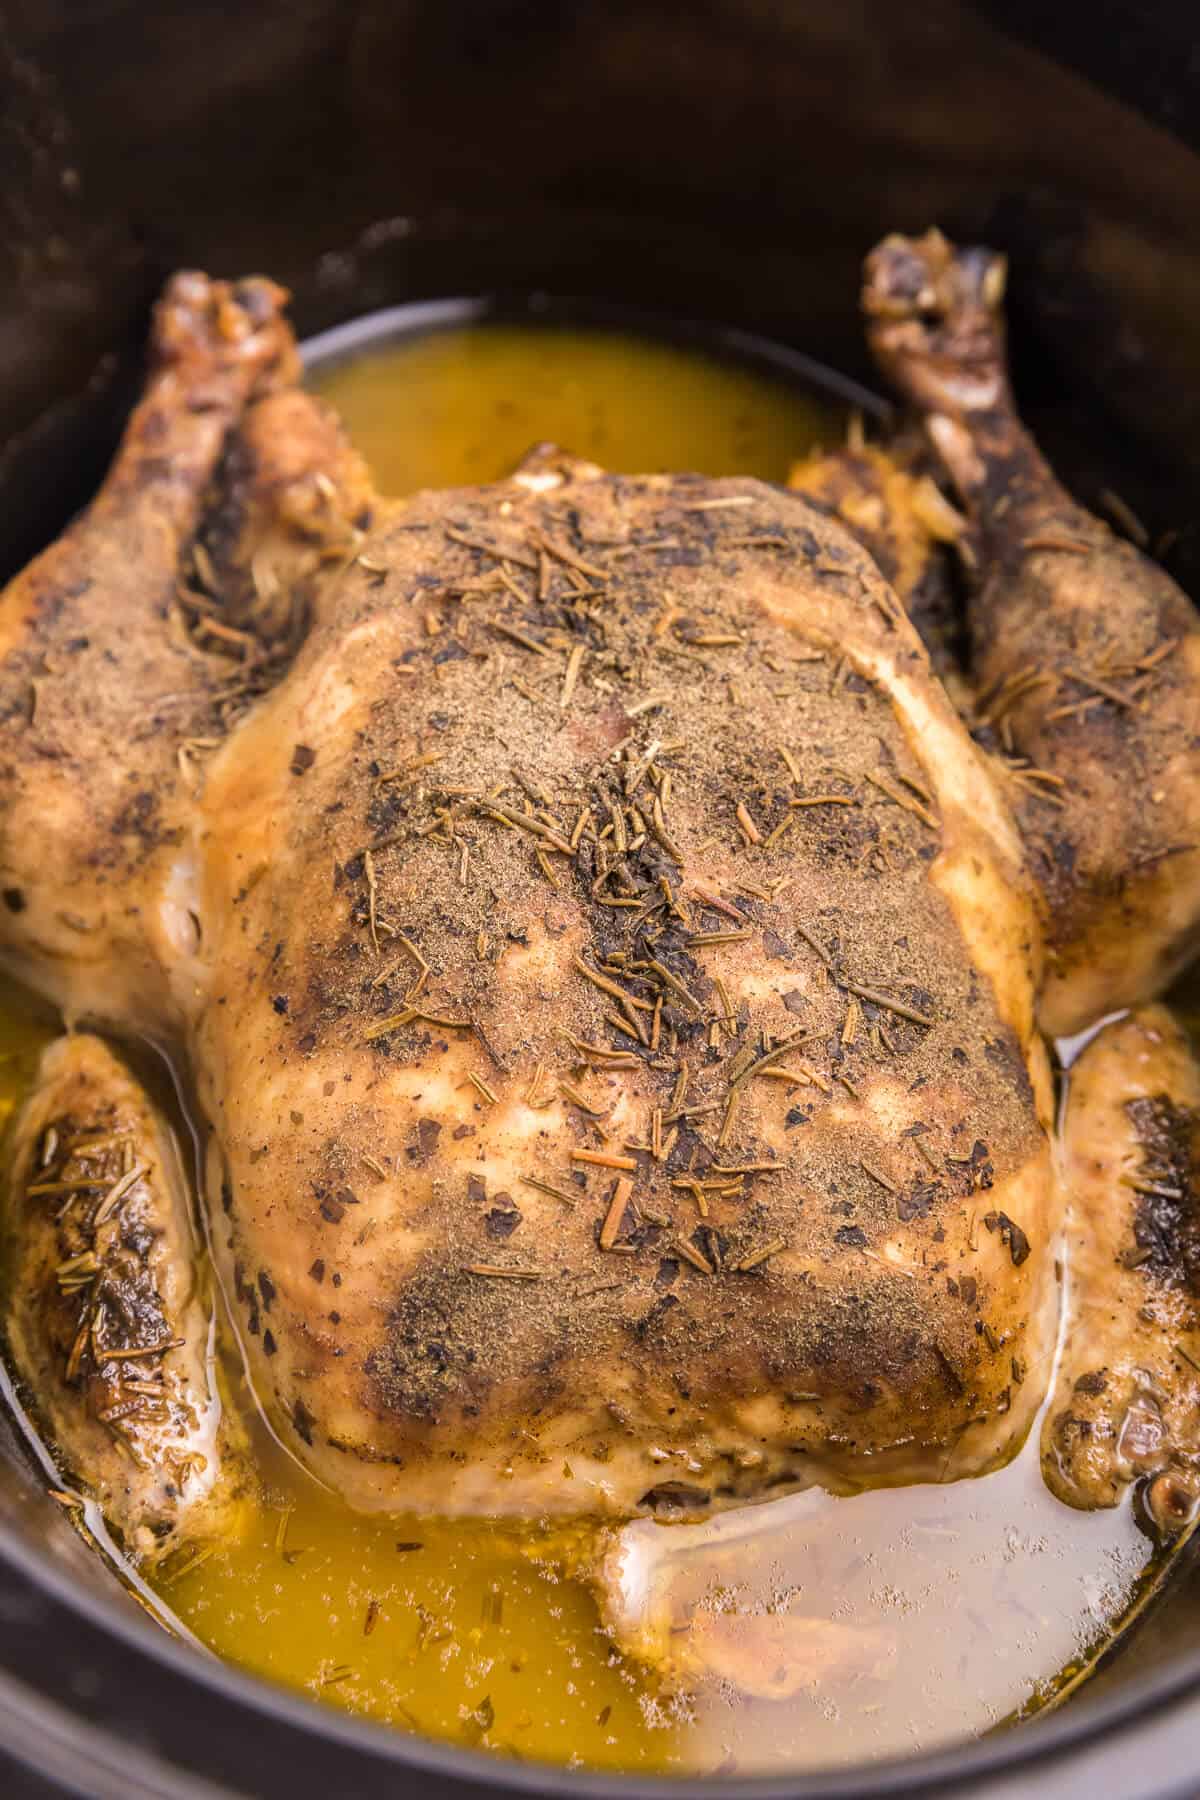 Lemon Herb Slow Cooker Chicken - Roast a whole chicken in your Crockpot! This easy chicken recipe is so much juicier with lemon juice and a succulent herb blend.